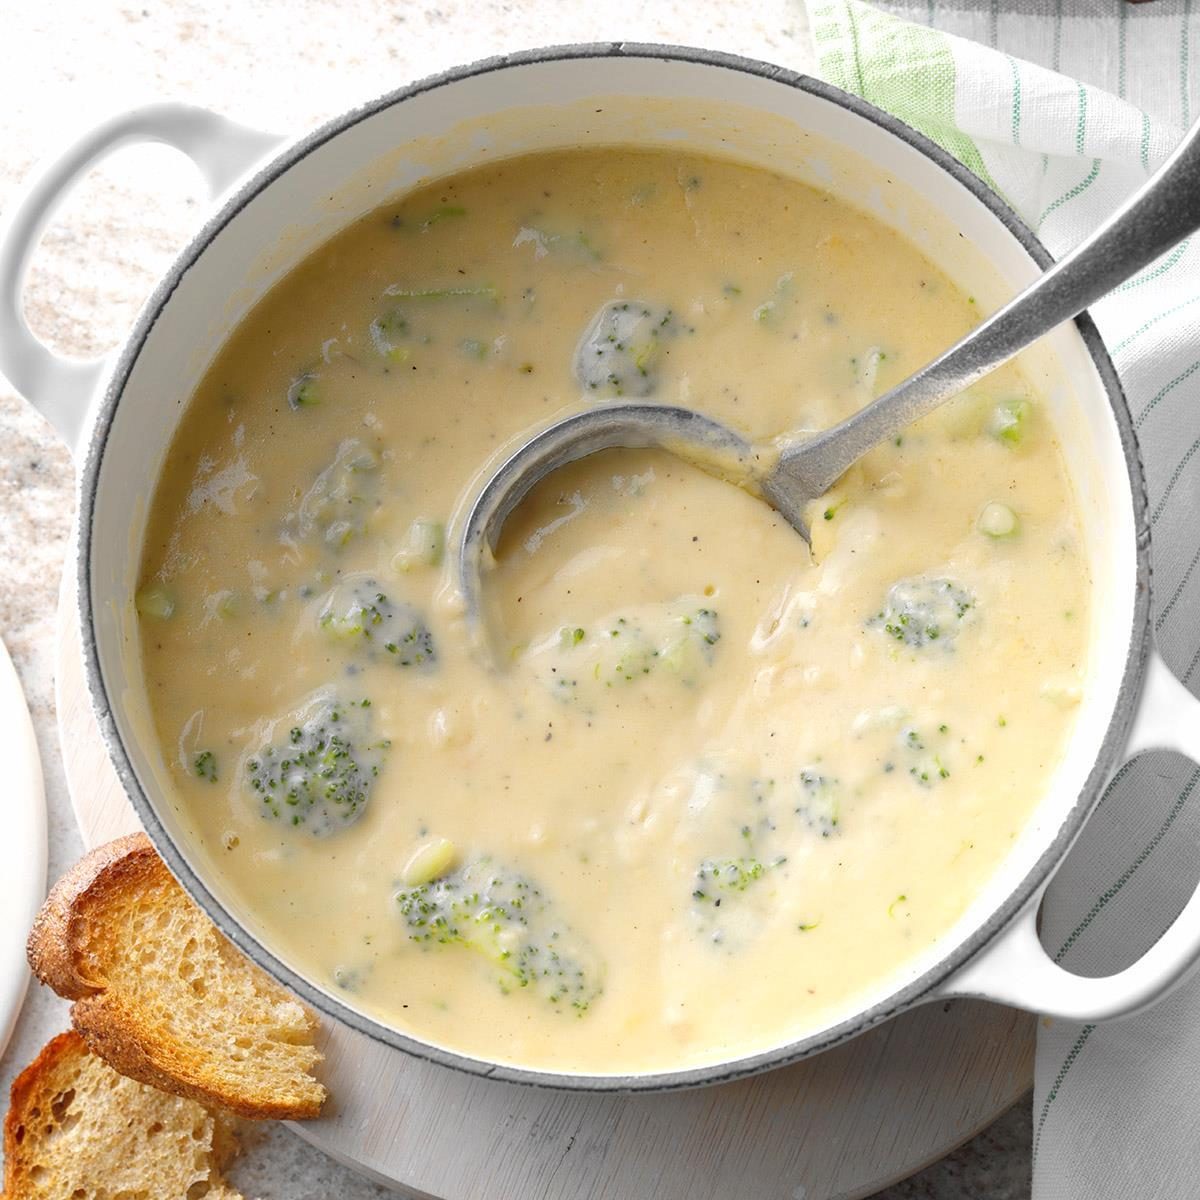 Inspired by: Panera Broccoli Cheddar Soup